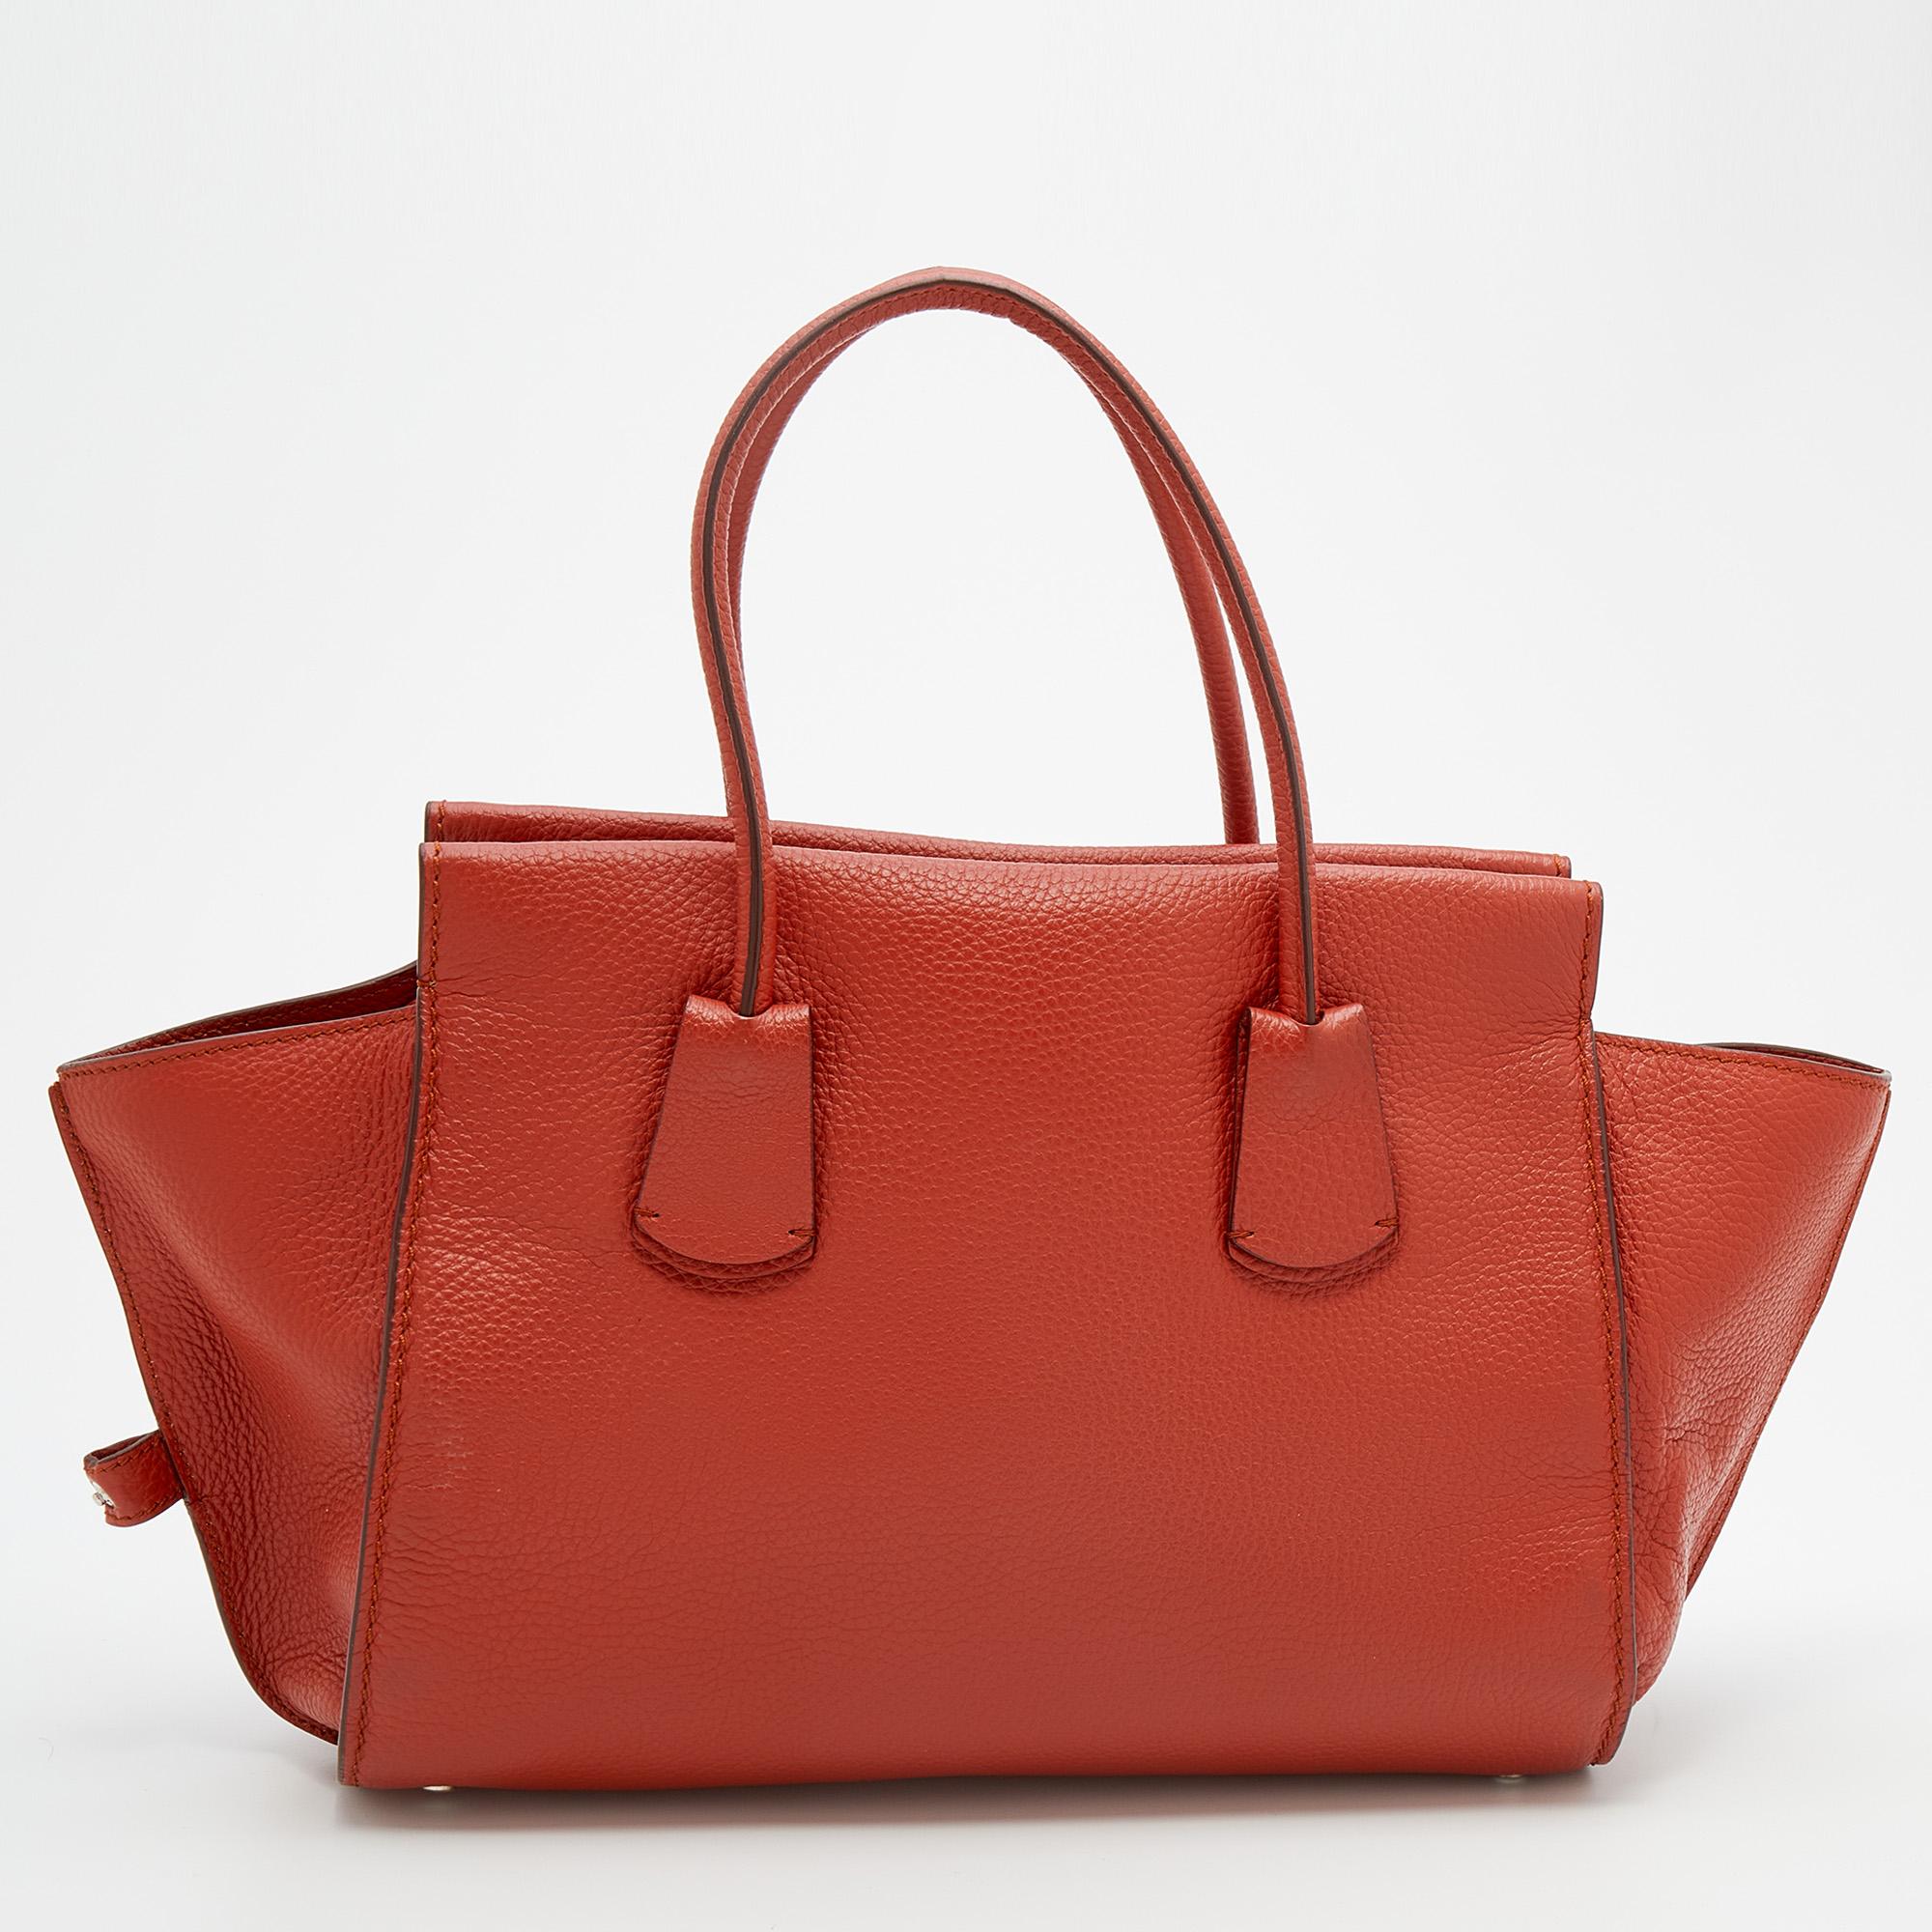 Filled with functional elements, this Tod's tote will be an ideal daily companion. It is created from leather and the brand detailing on the front offers it a signature touch. Dual handles at the top, flappy wings at the side, and a spacious